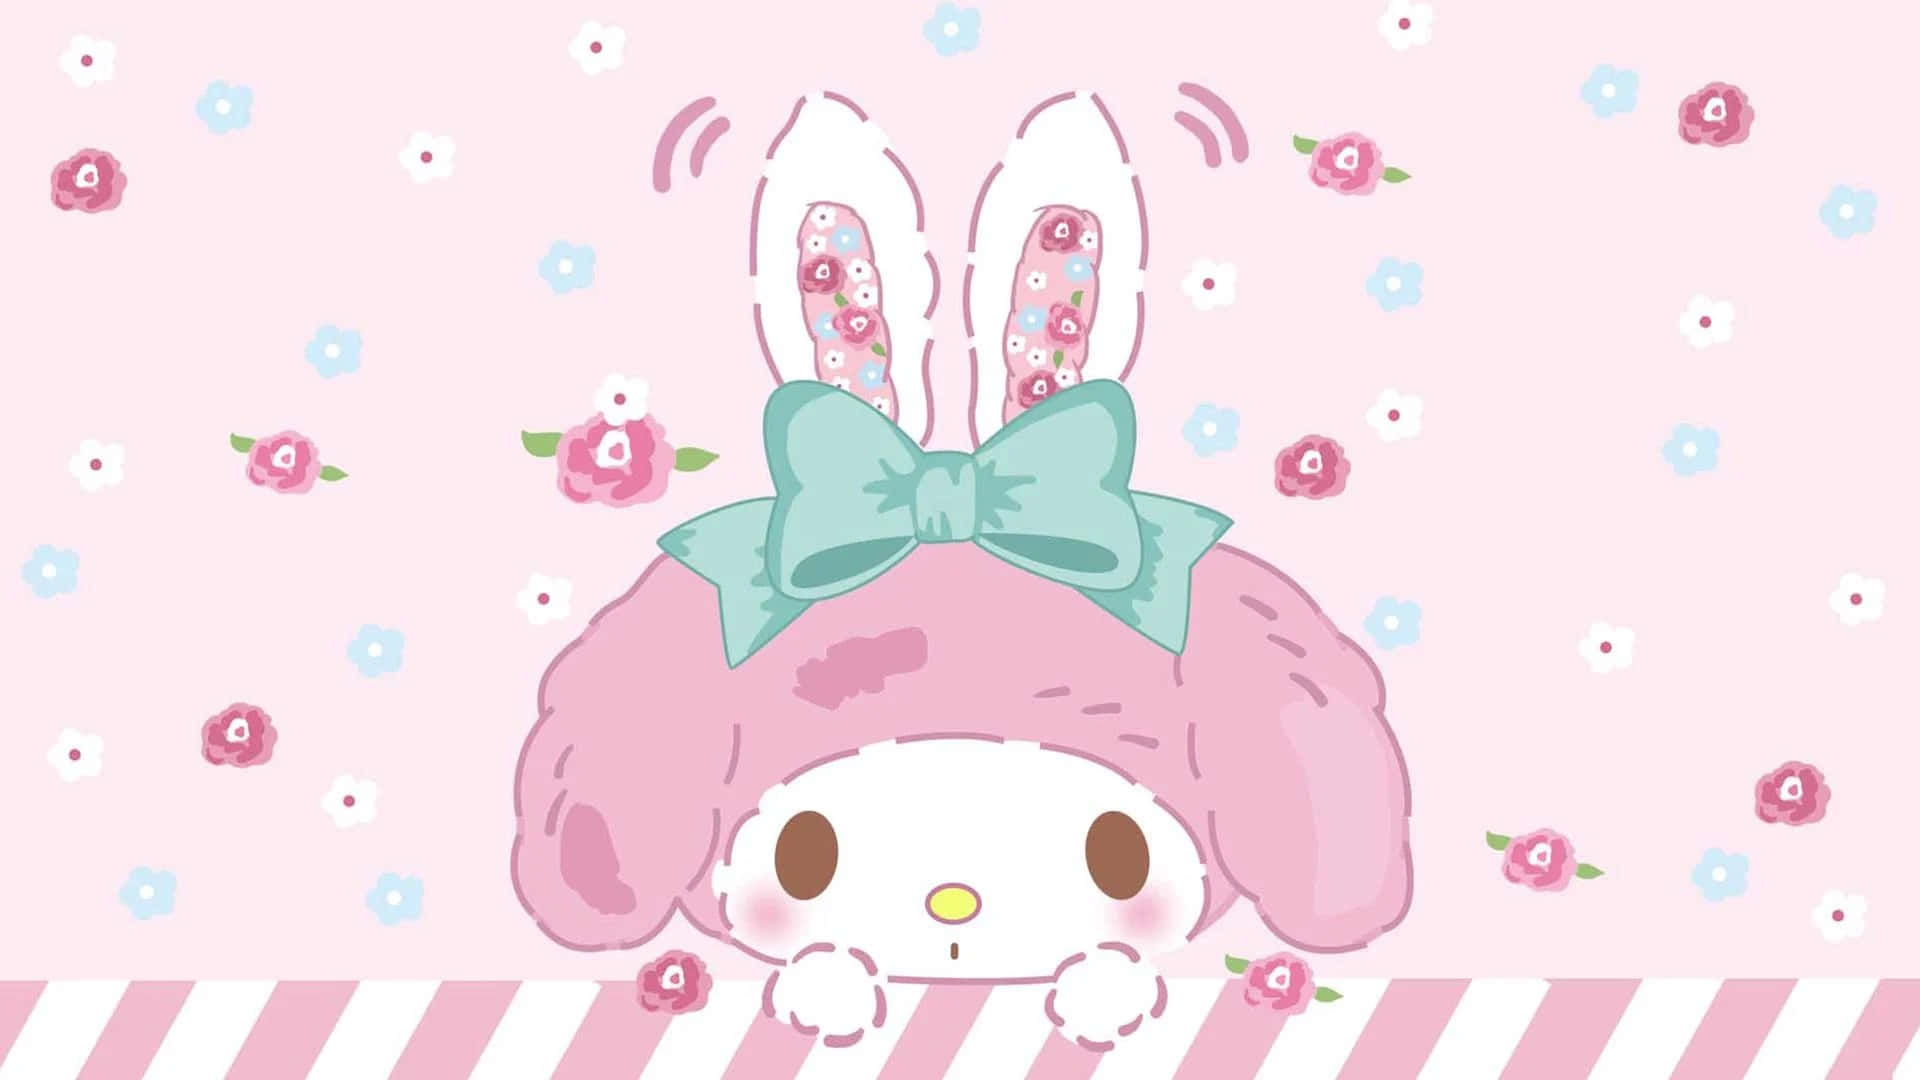 Show your Sanrio love with this fun background!